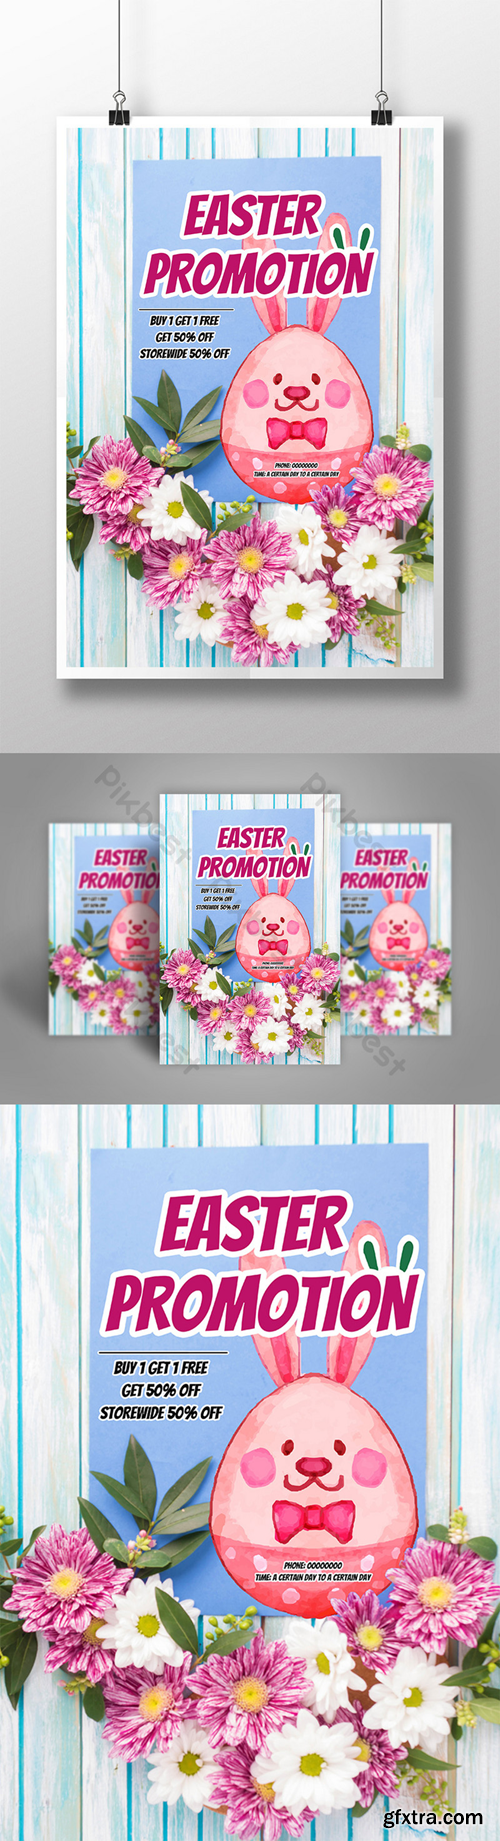 Easter beauty promotion poster Template PSD